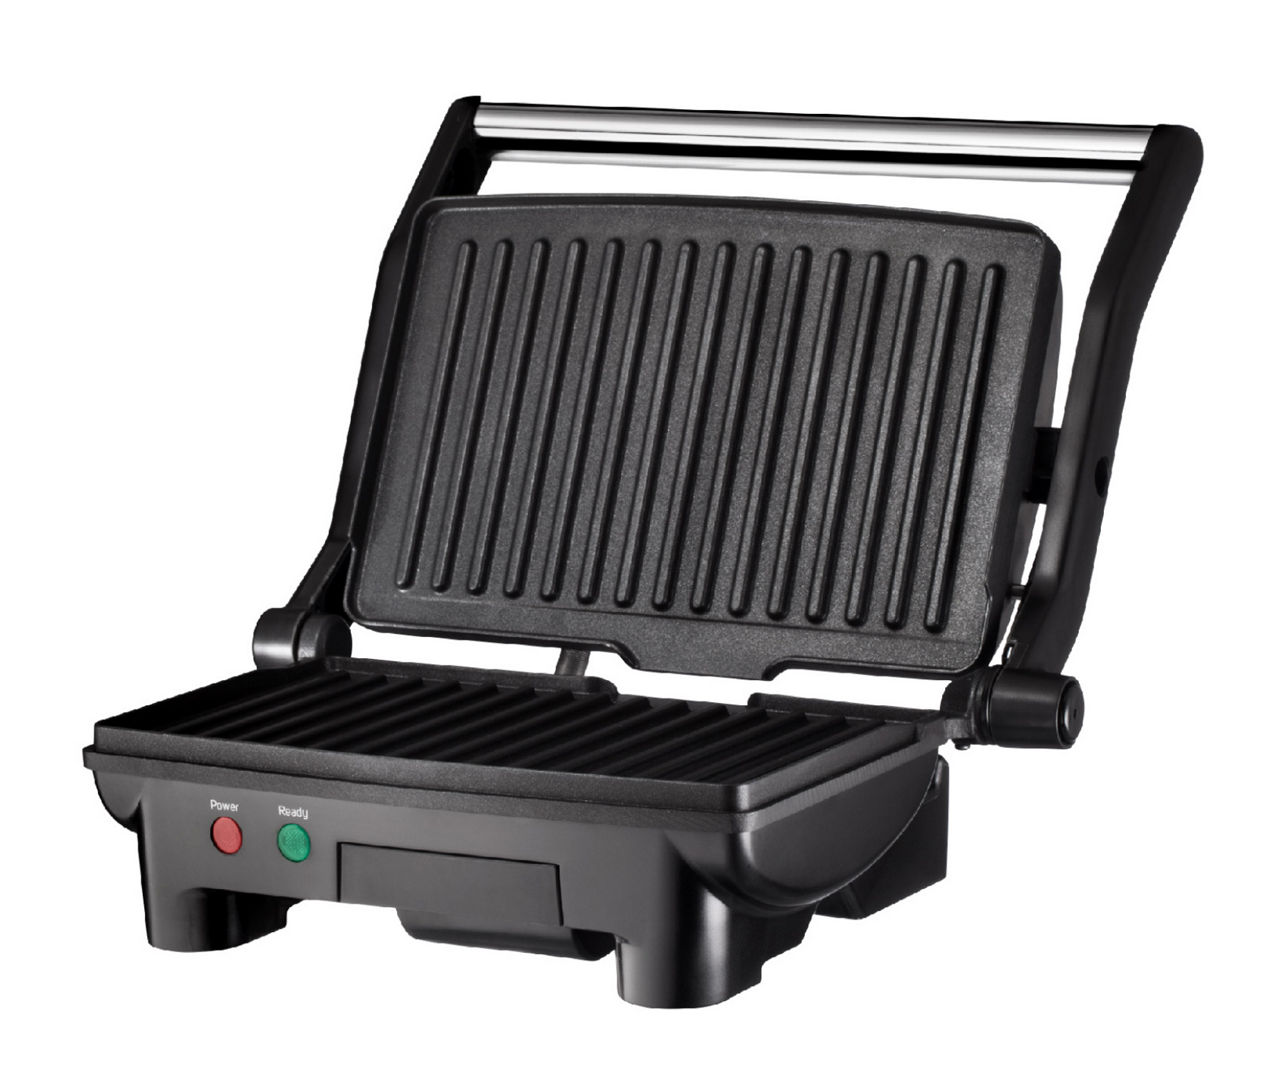 Aicok GT-02 Panini Press Grill & Gourmet Sandwich Maker Polished Stainless  Steel